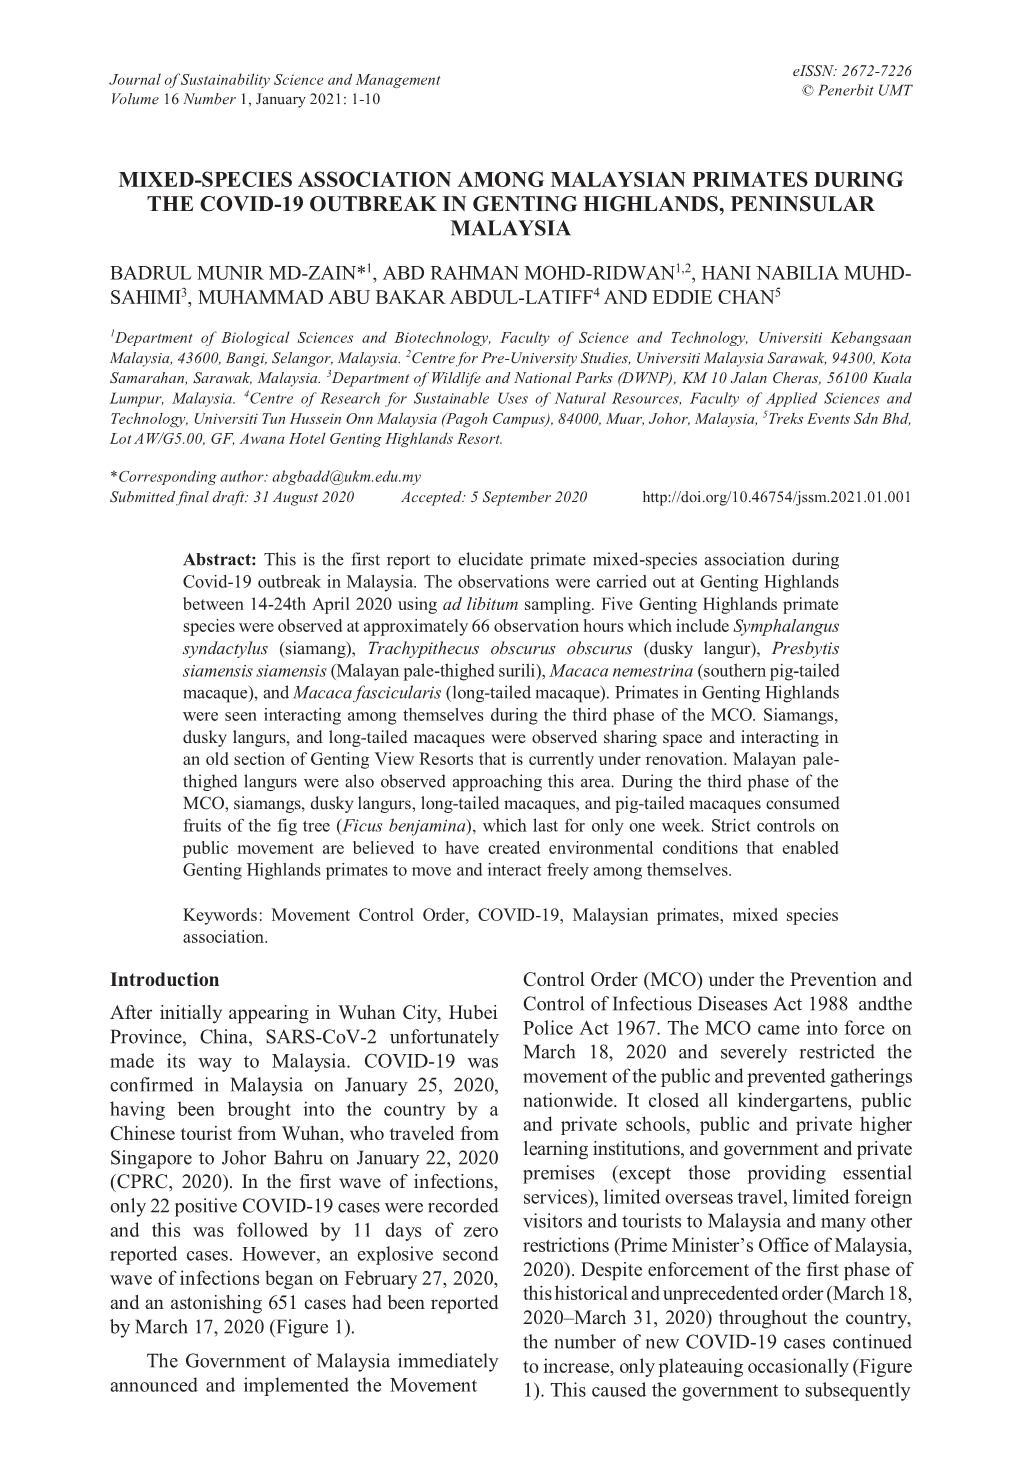 Mixed-Species Association Among Malaysian Primates During the Covid-19 Outbreak in Genting Highlands, Peninsular Malaysia